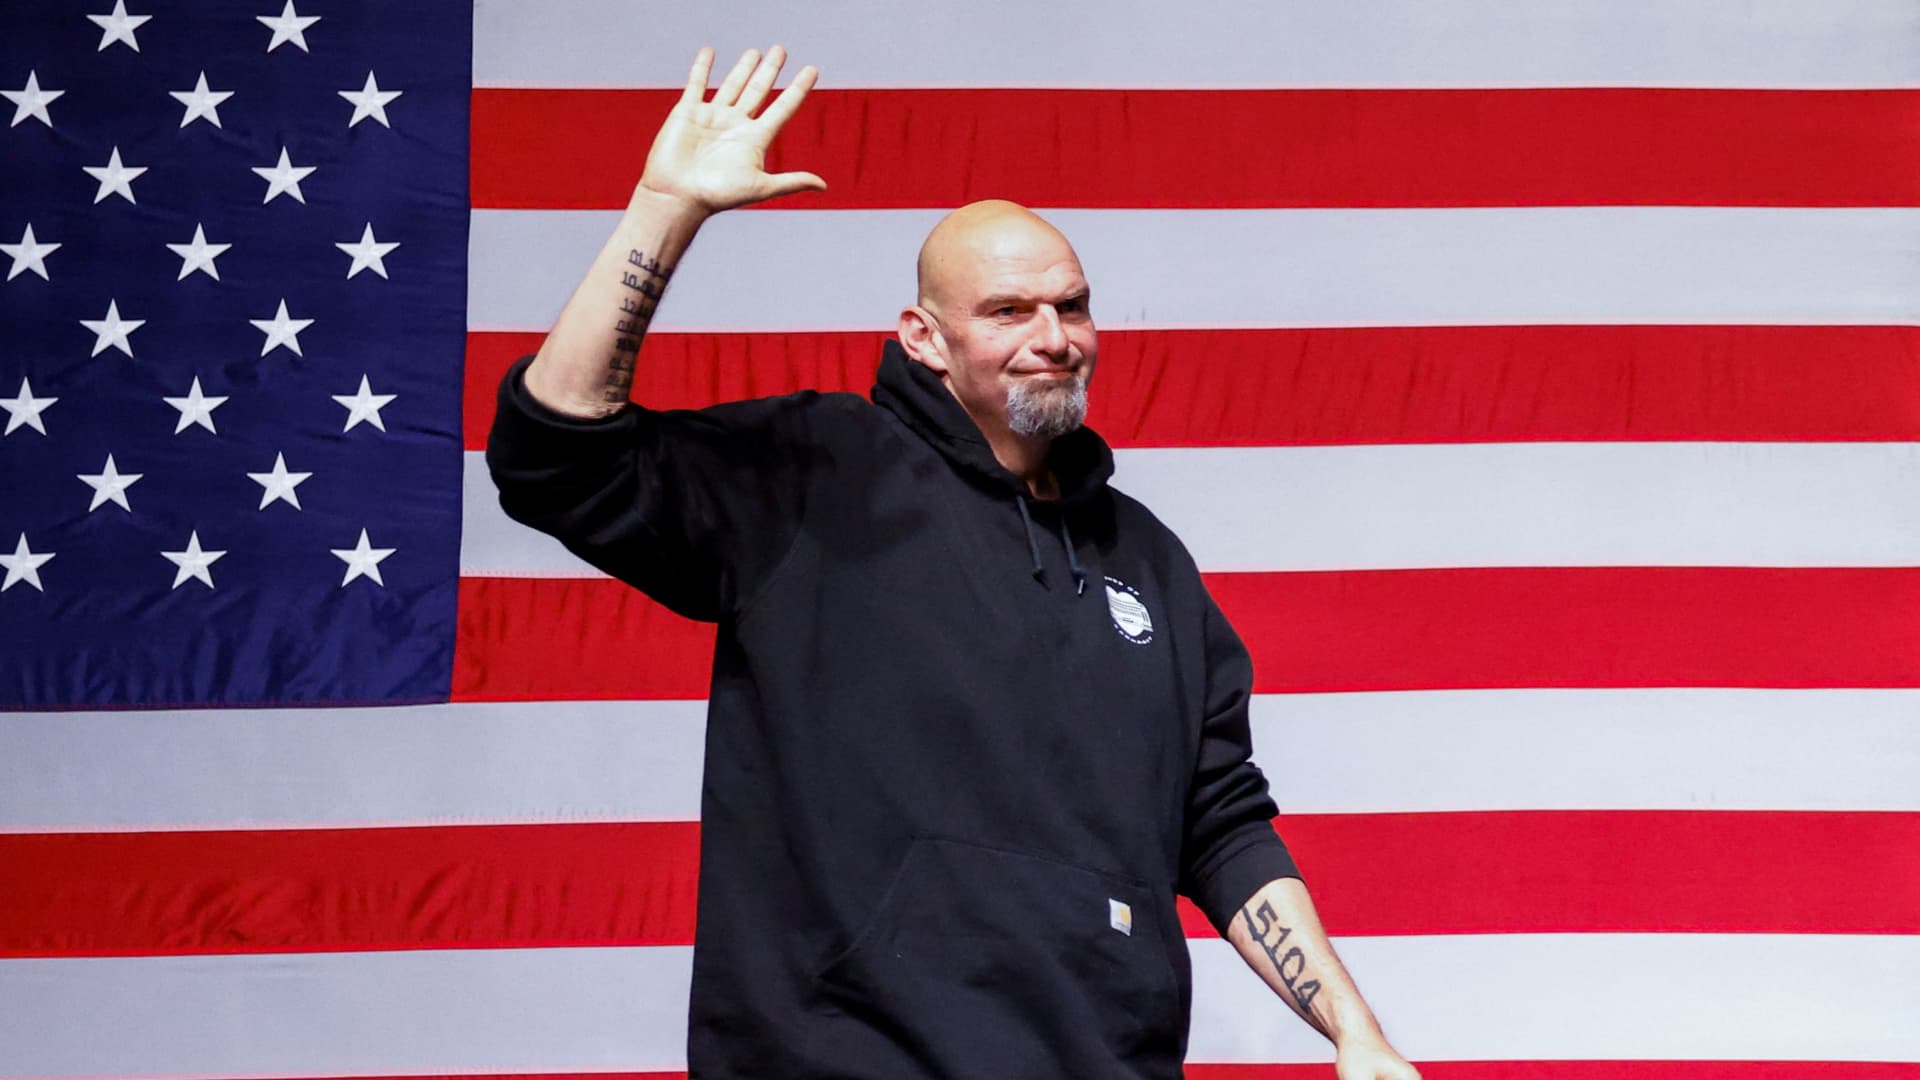 Pennsylvania Lieutenant Governor and U.S. Senate candidate John Fetterman arrives to speak during his 2022 U.S. midterm elections night party in Pittsburgh, Pennsylvania, U.S., November 9, 2022.